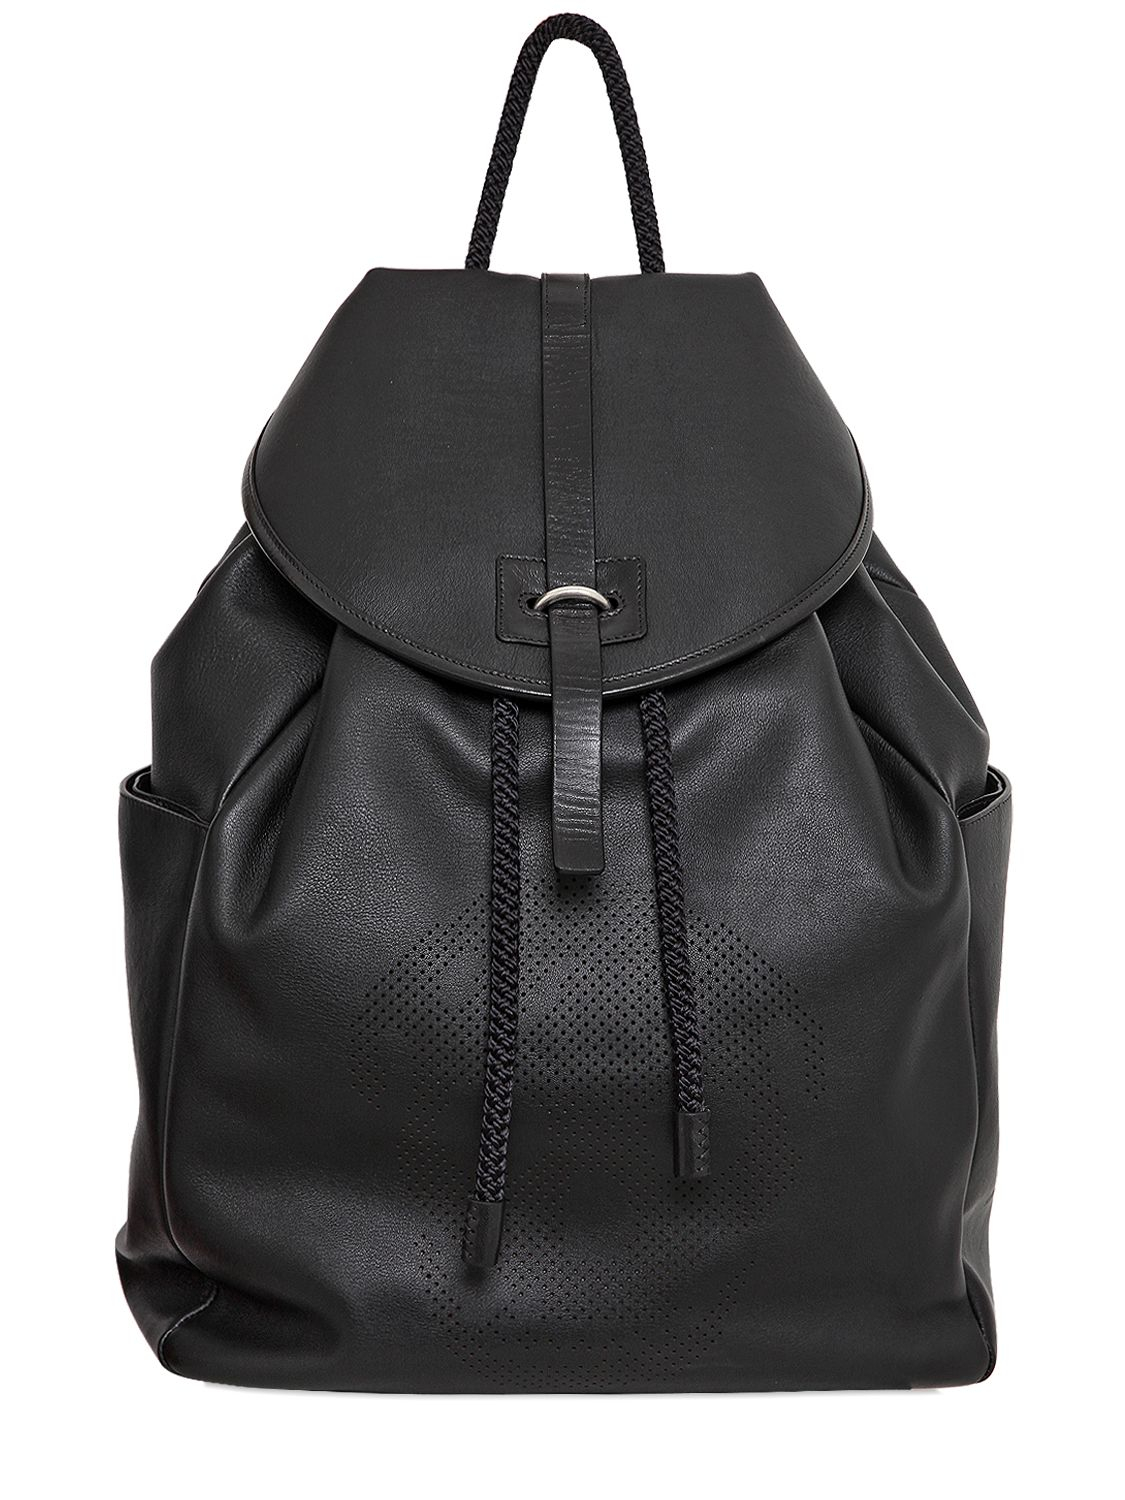 Lyst - Alexander Mcqueen Perforated Skull Soft Leather Backpack in ...